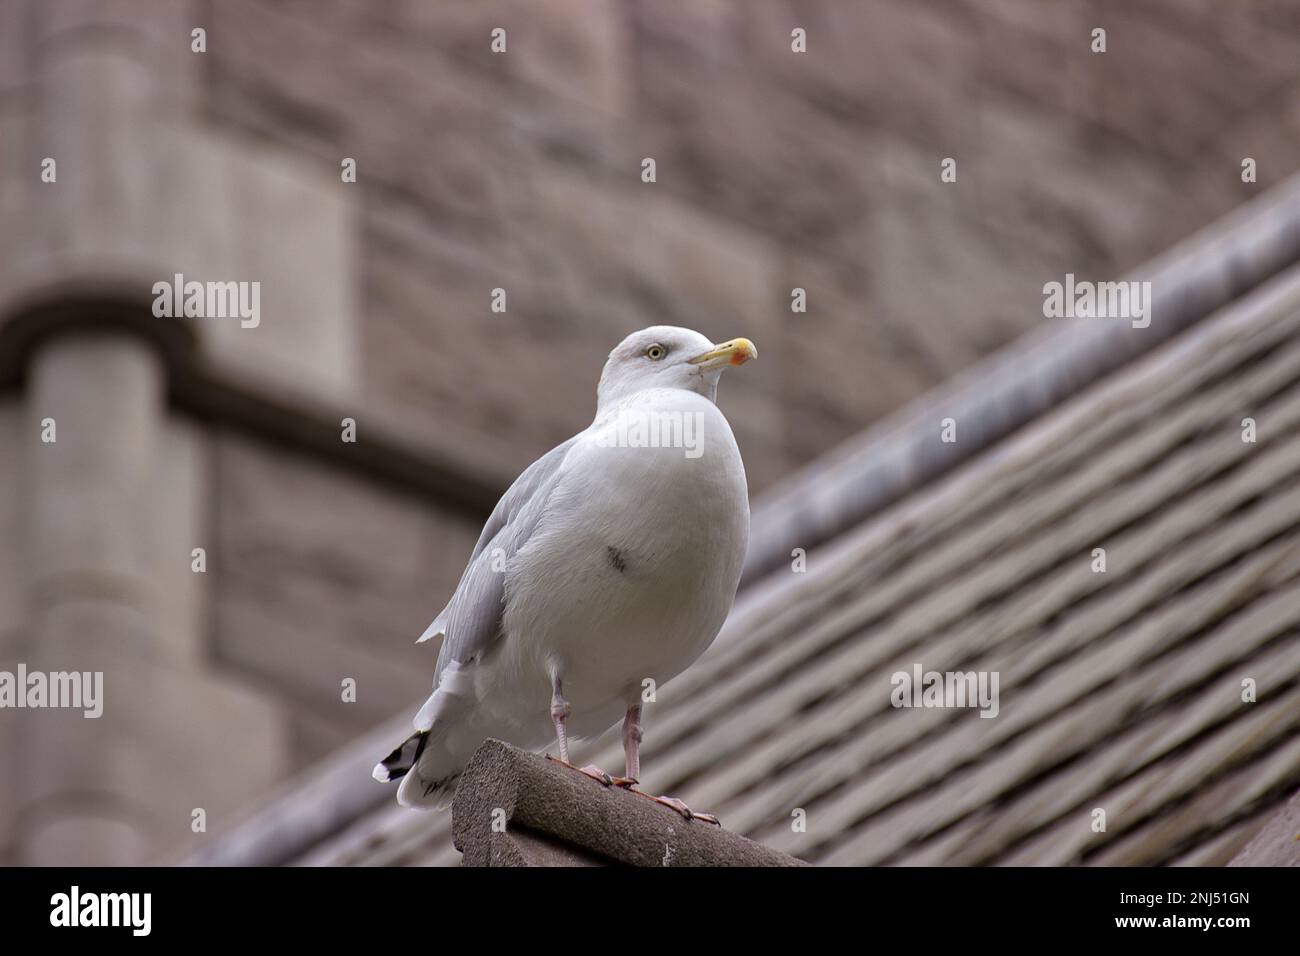 Full body shot of a seagull, photographed from below, in the background diffuse a building. Stock Photo